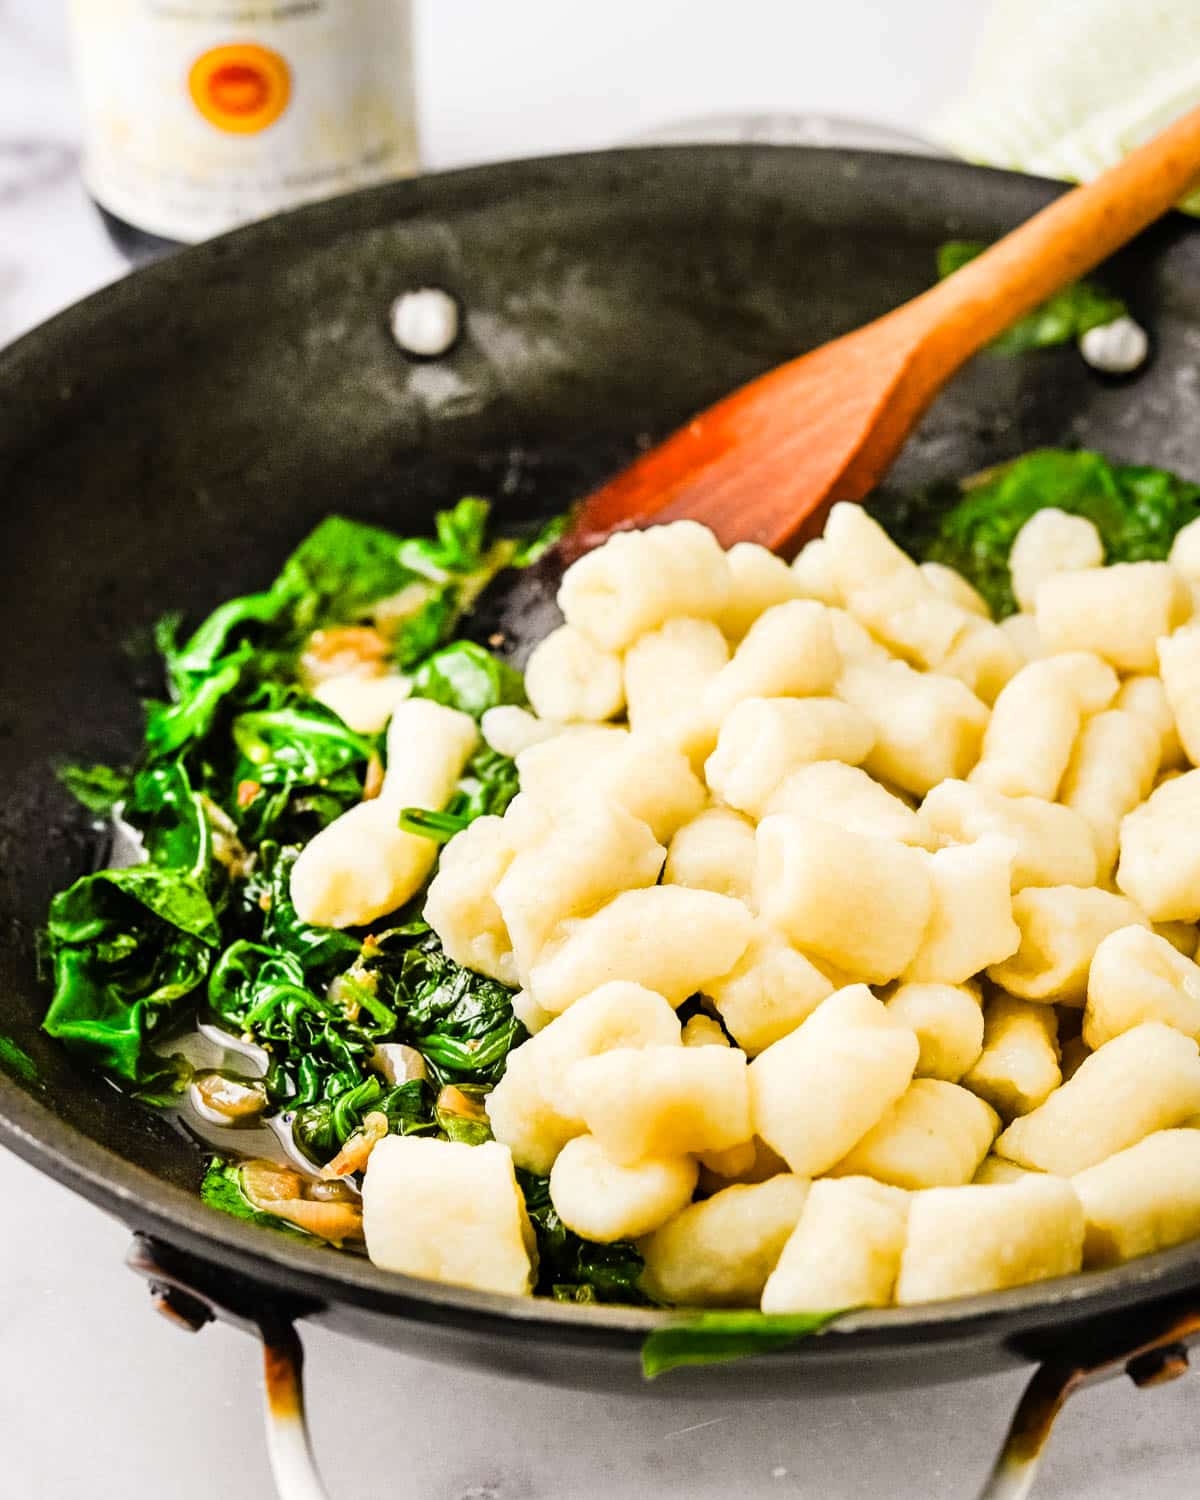 Tossing cooked gnocchi with the spinach.